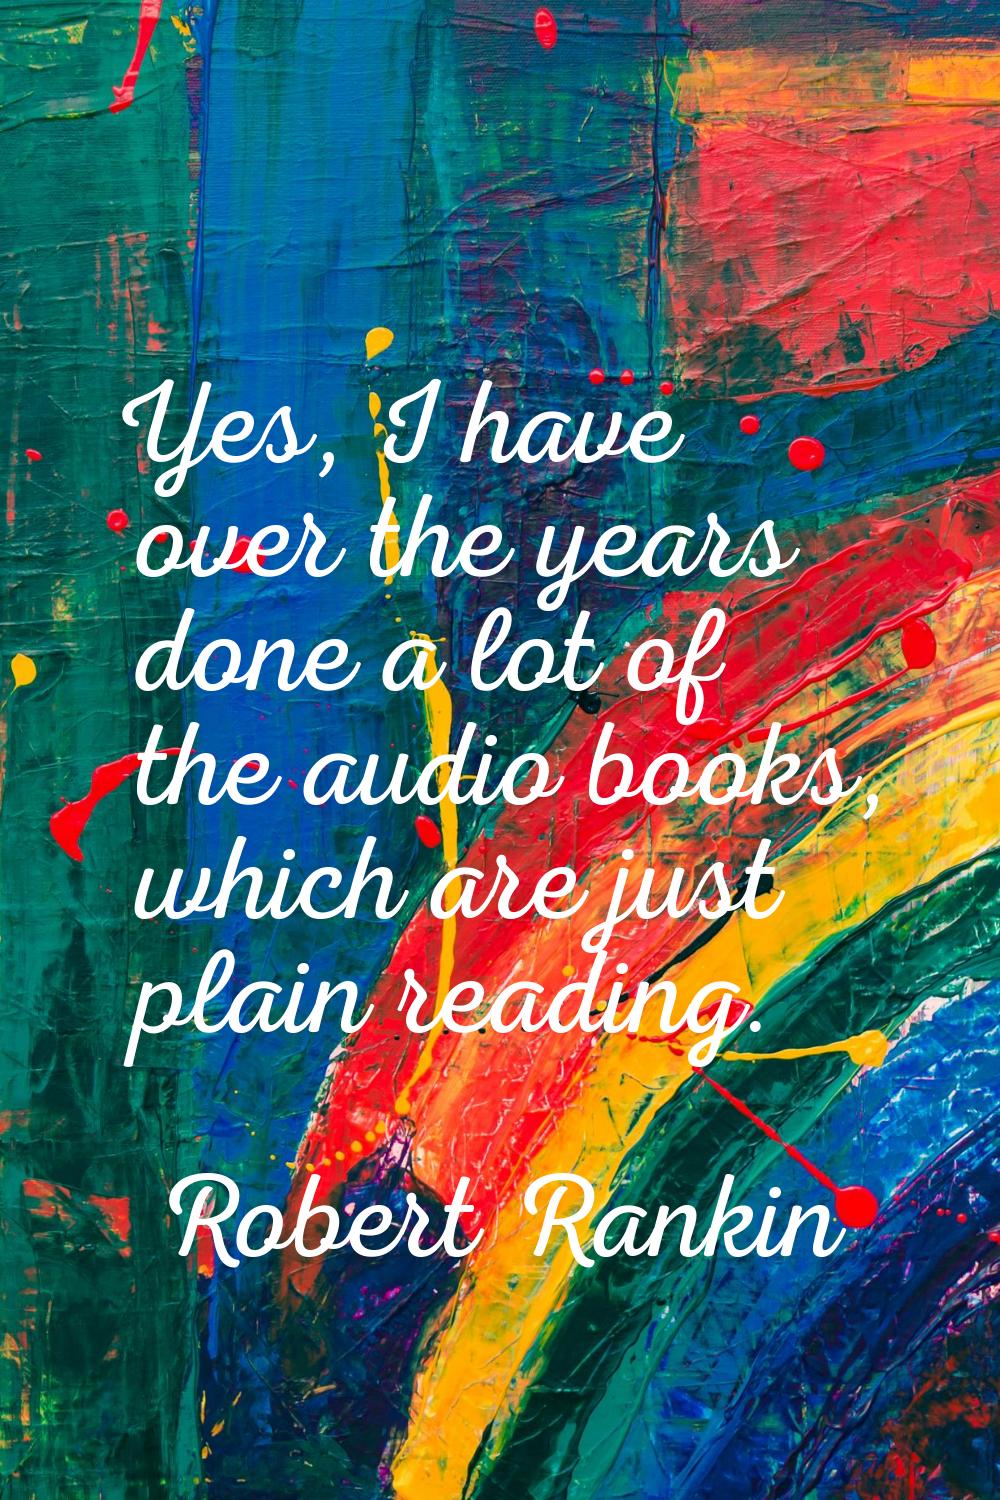 Yes, I have over the years done a lot of the audio books, which are just plain reading.